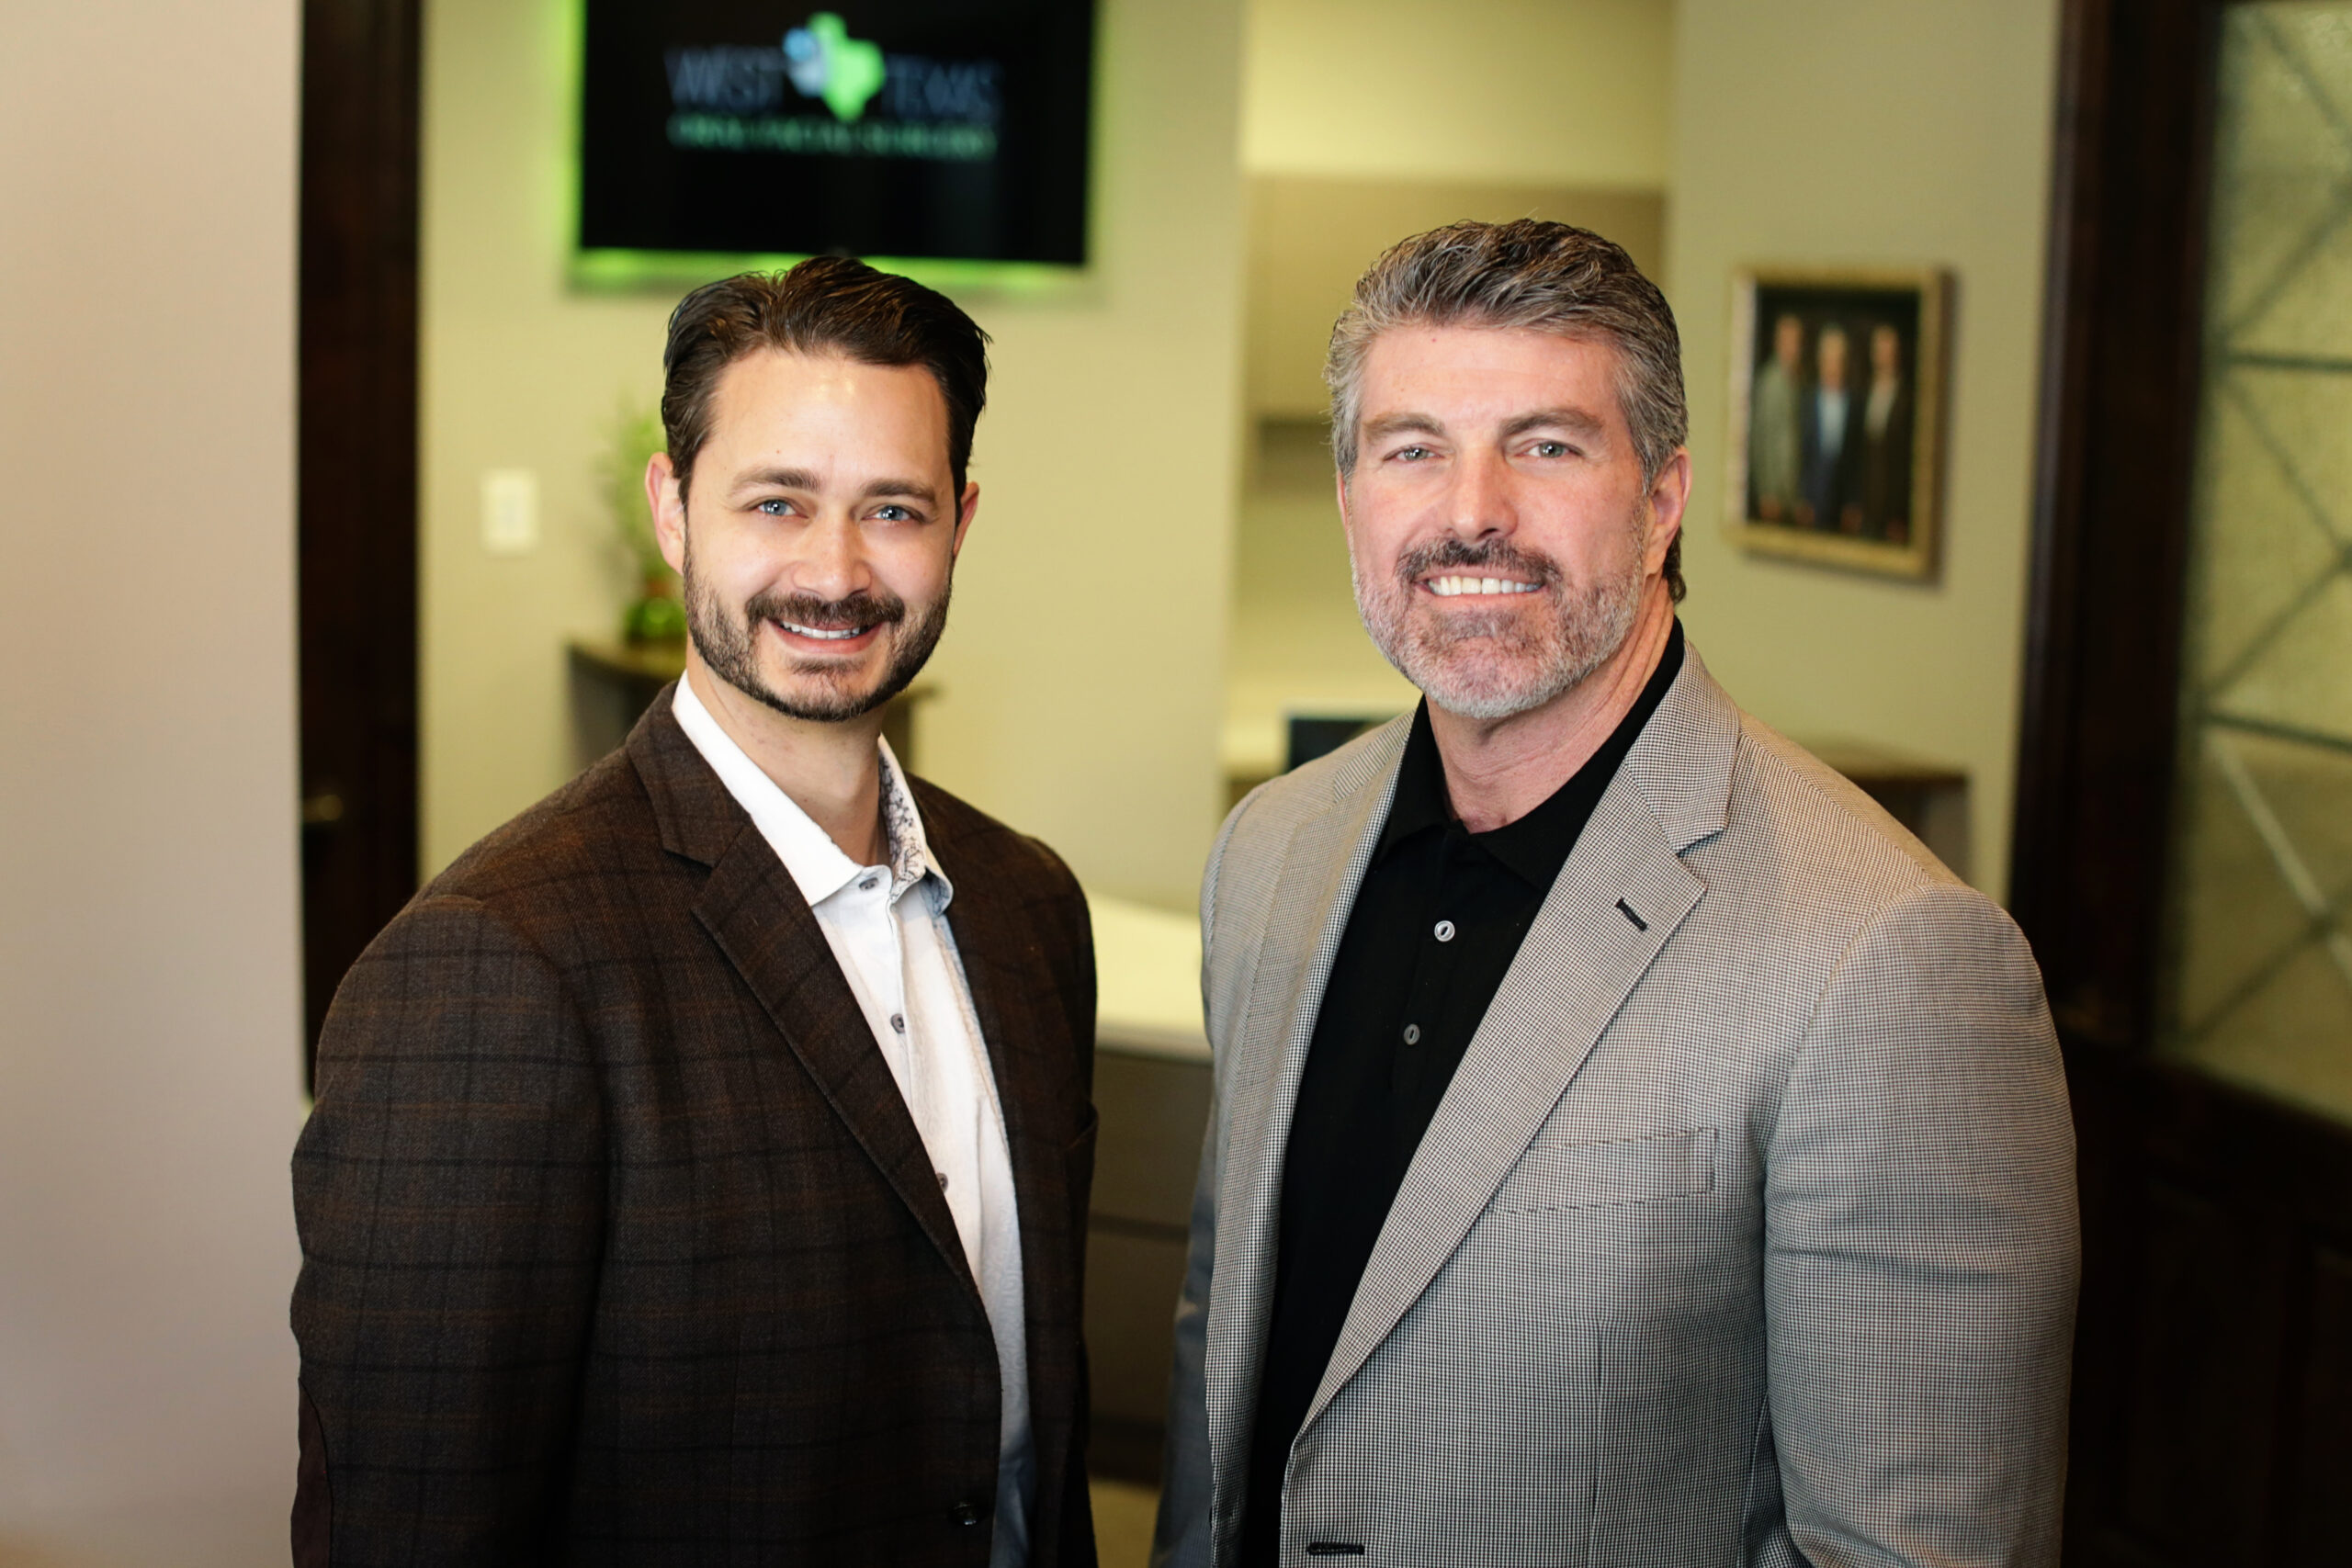 Dr. Higley and Dr. Barrett, our oral surgeons at West Texas Oral Surgery